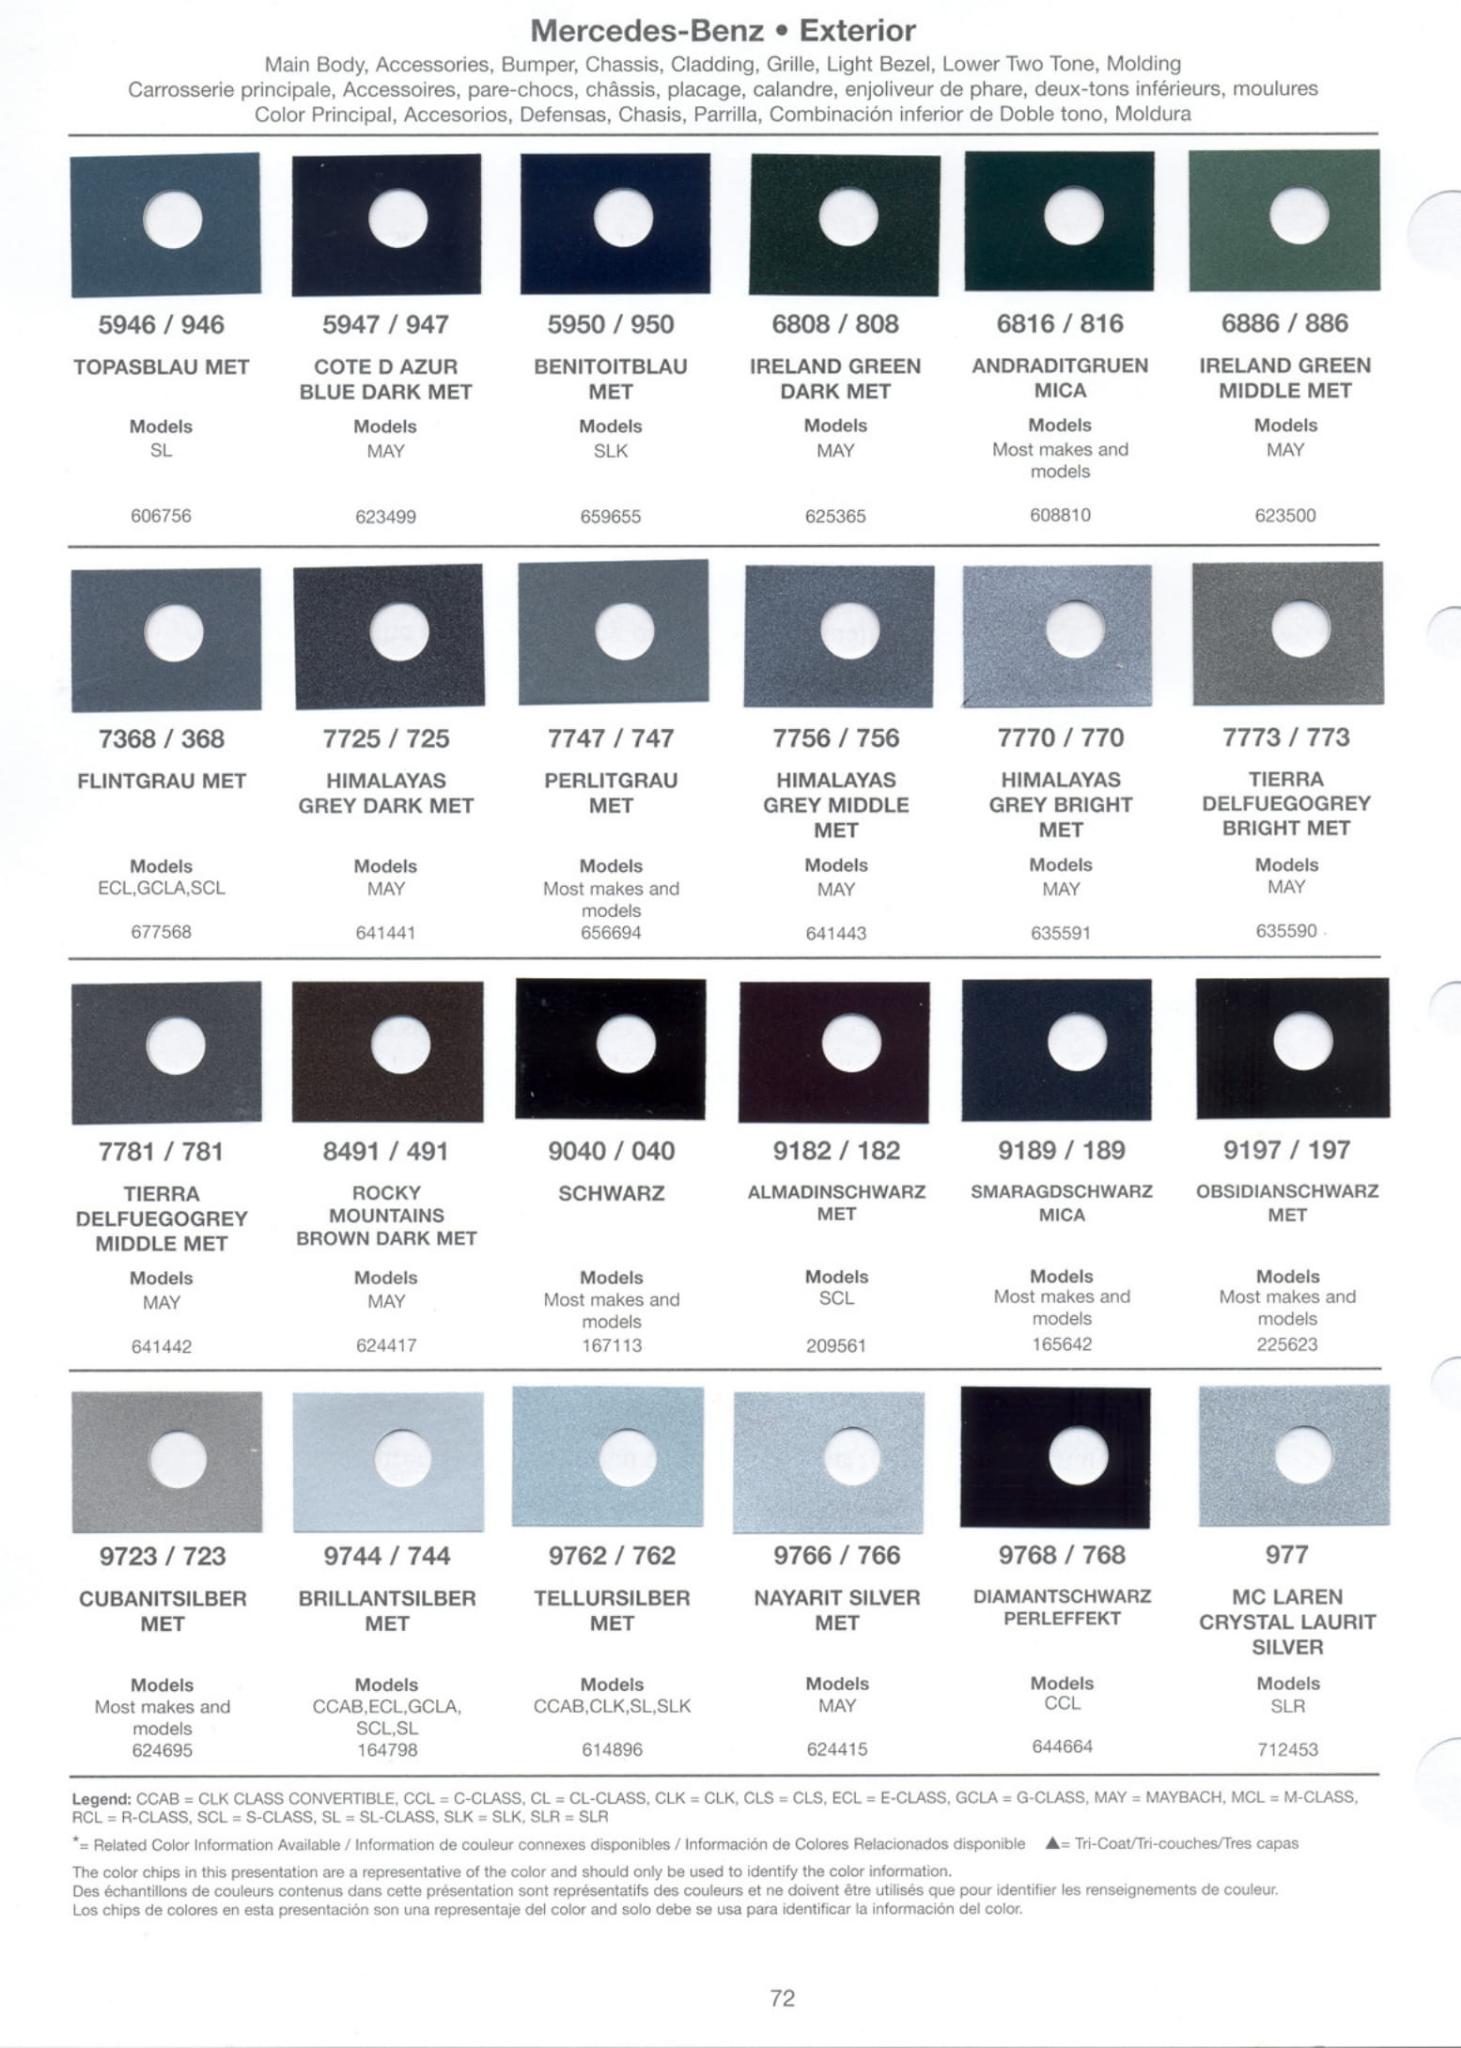 paint codes, color names, vehicles that the colors where used on & Stock numbers for 2006 Mercedes Benz vehicles